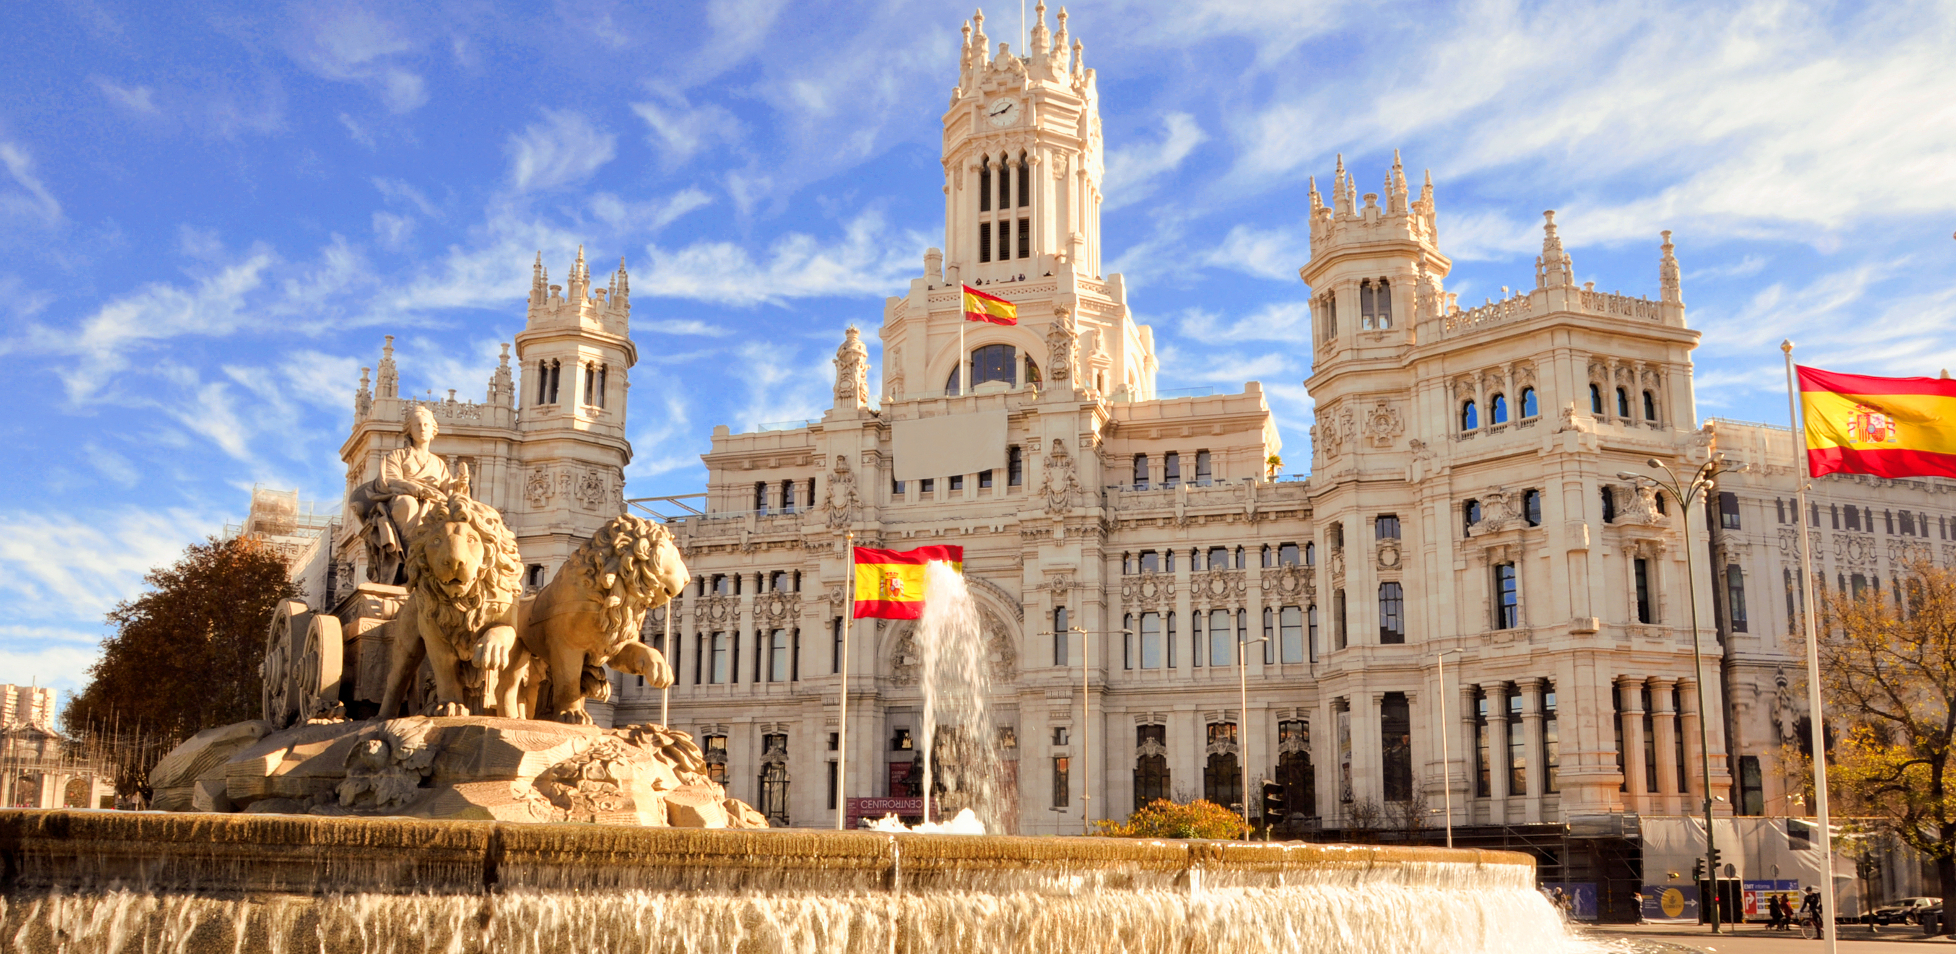 Miami to Madrid Spain $354 RT Airfares on TAP Air Portugal (Travel January - March 2023)